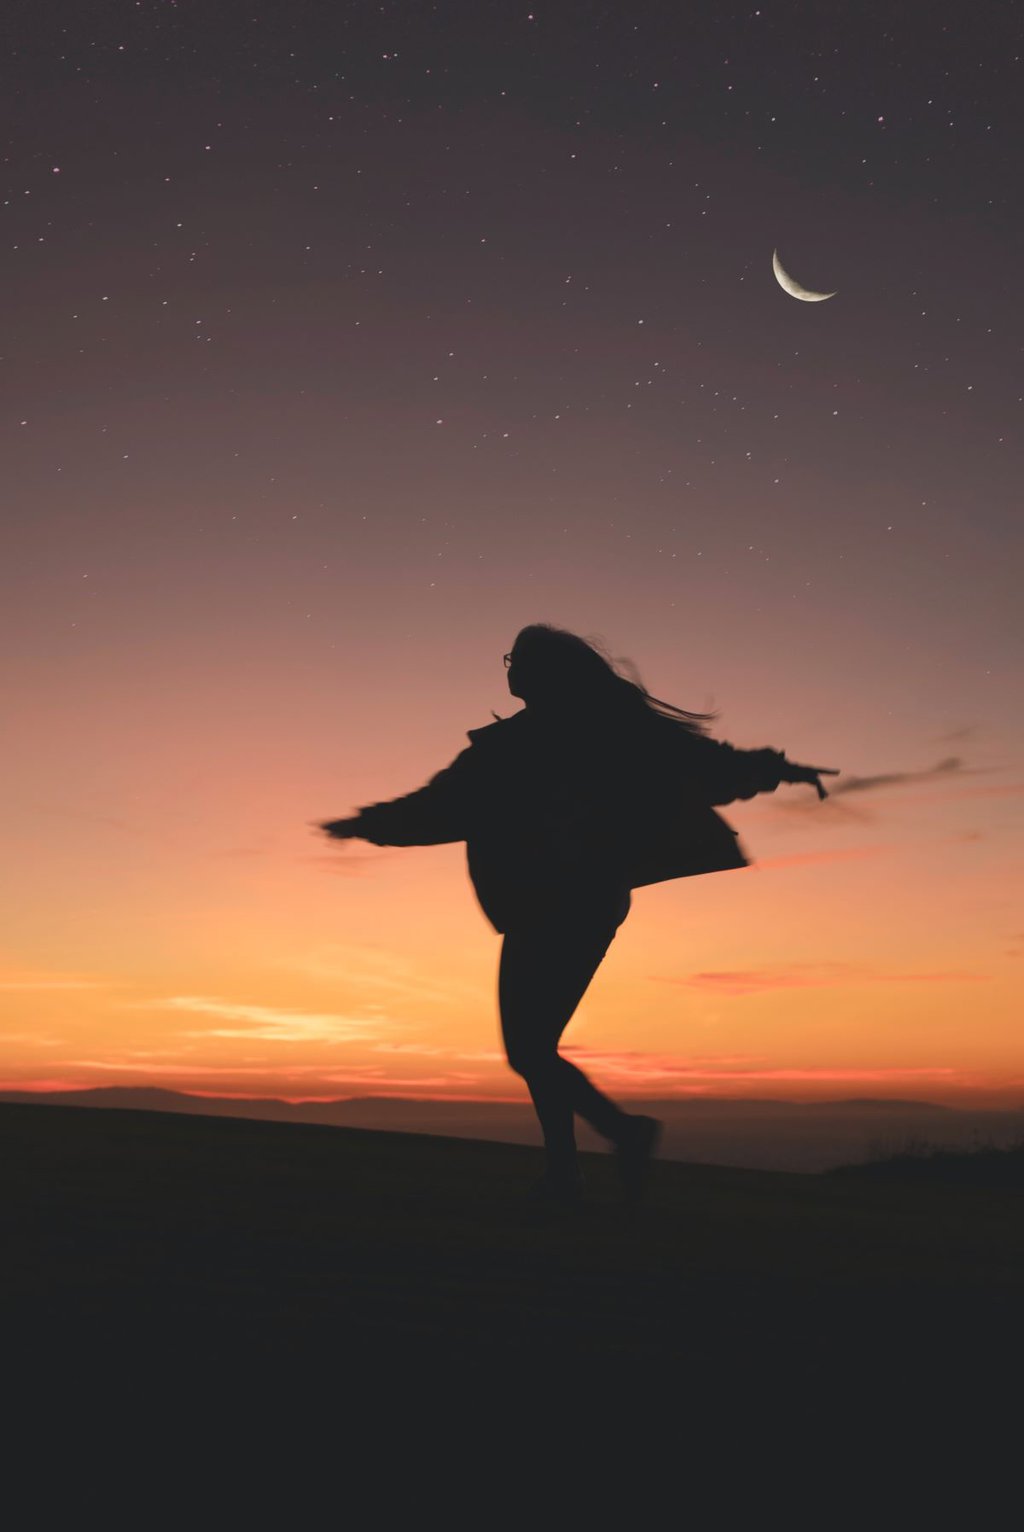 The Moon Made Me Do It: Moon Energies And 7 Wild Facts That Will Change Your Perspective